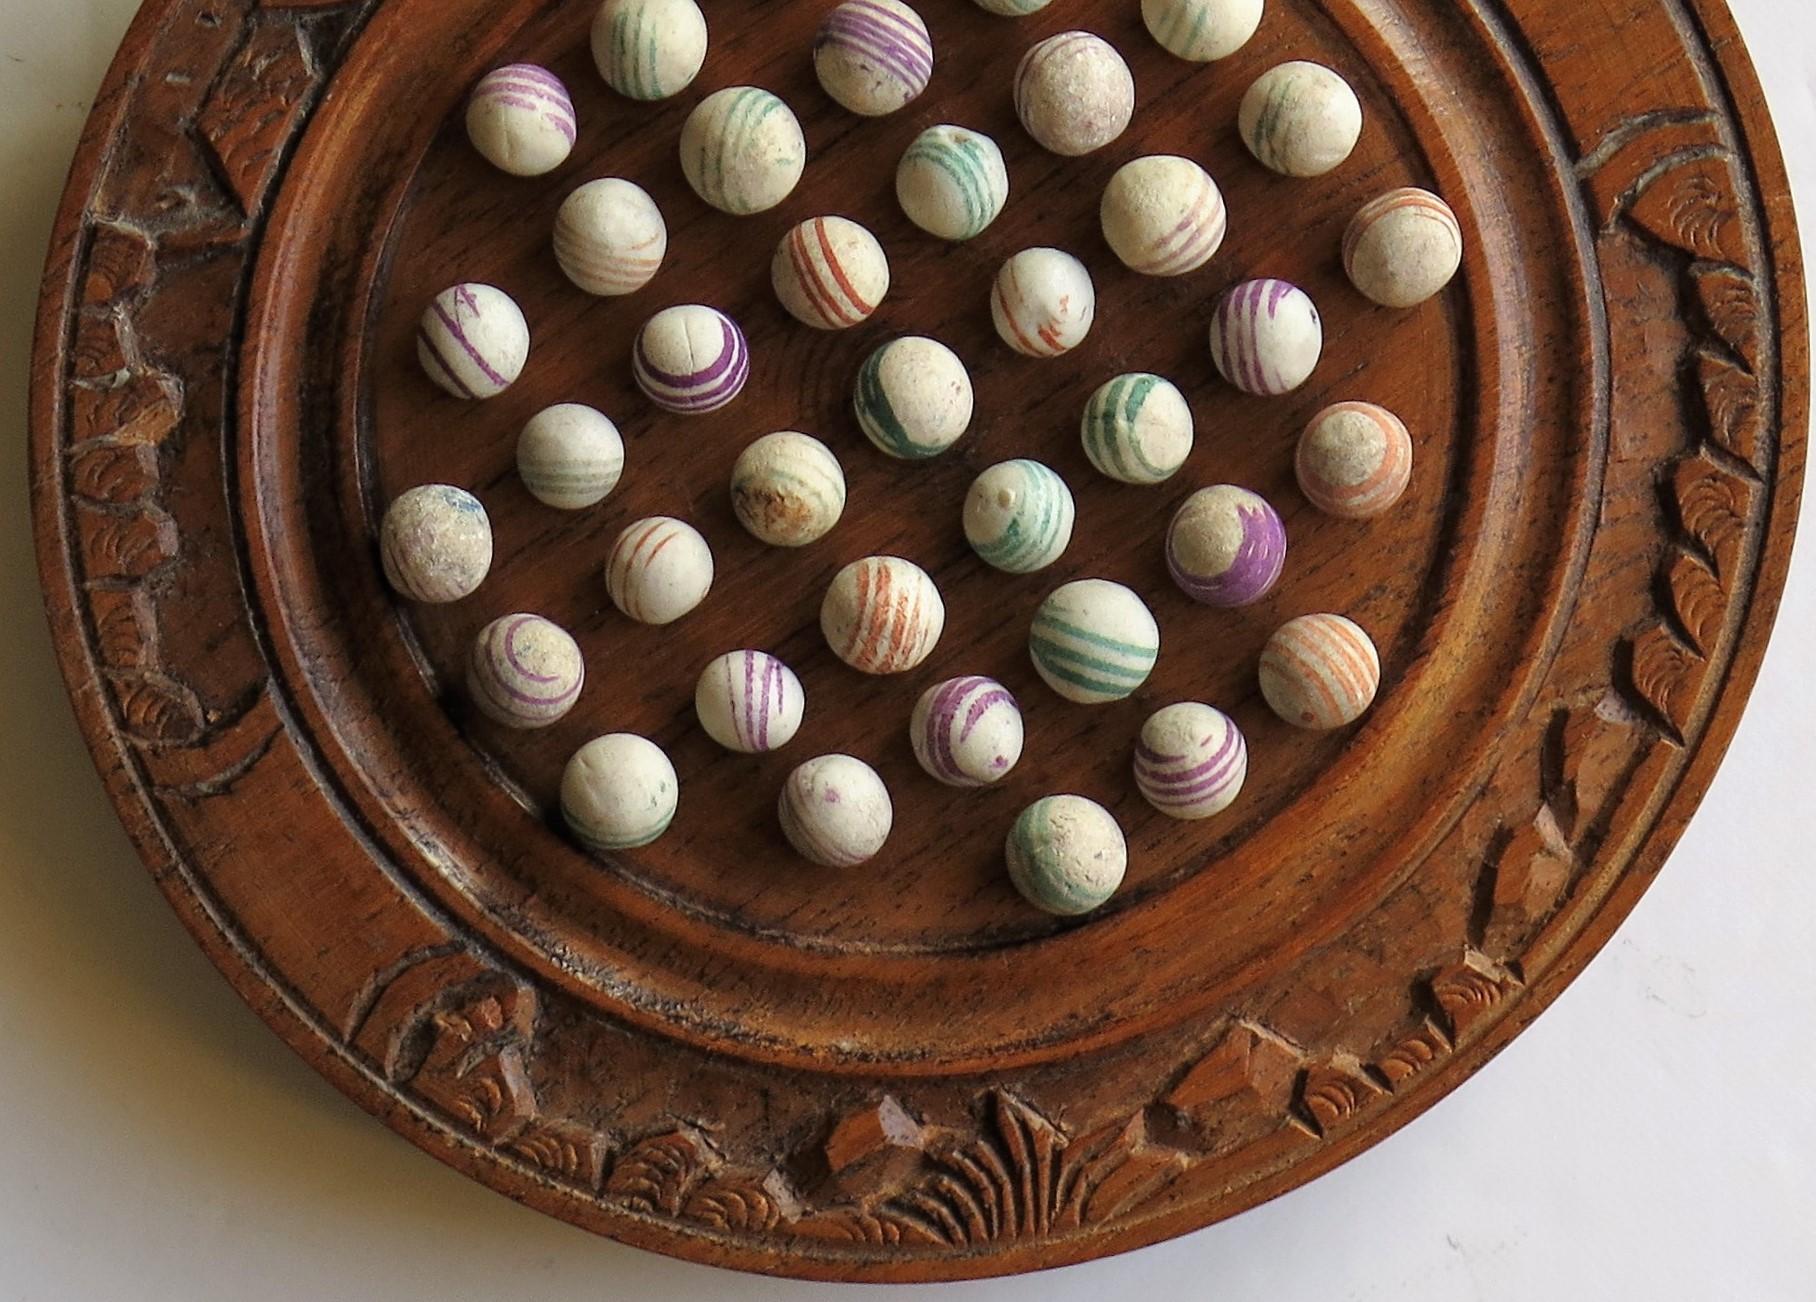 Carved Marble Solitaire Board Game with 37 Early Handmade Ceramic Marbles, circa 1870